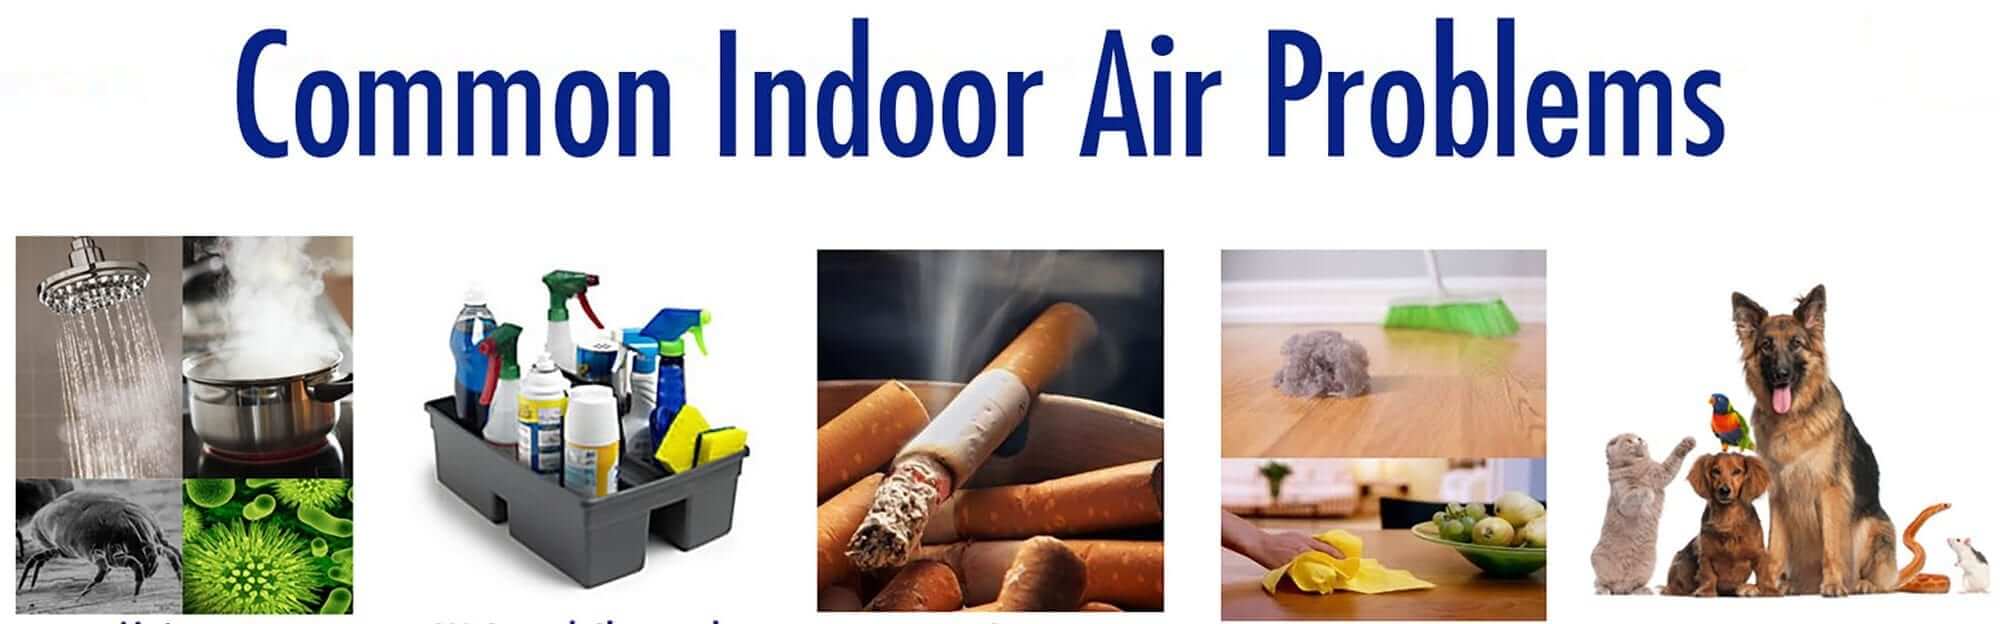 Common Indoor Air Problems